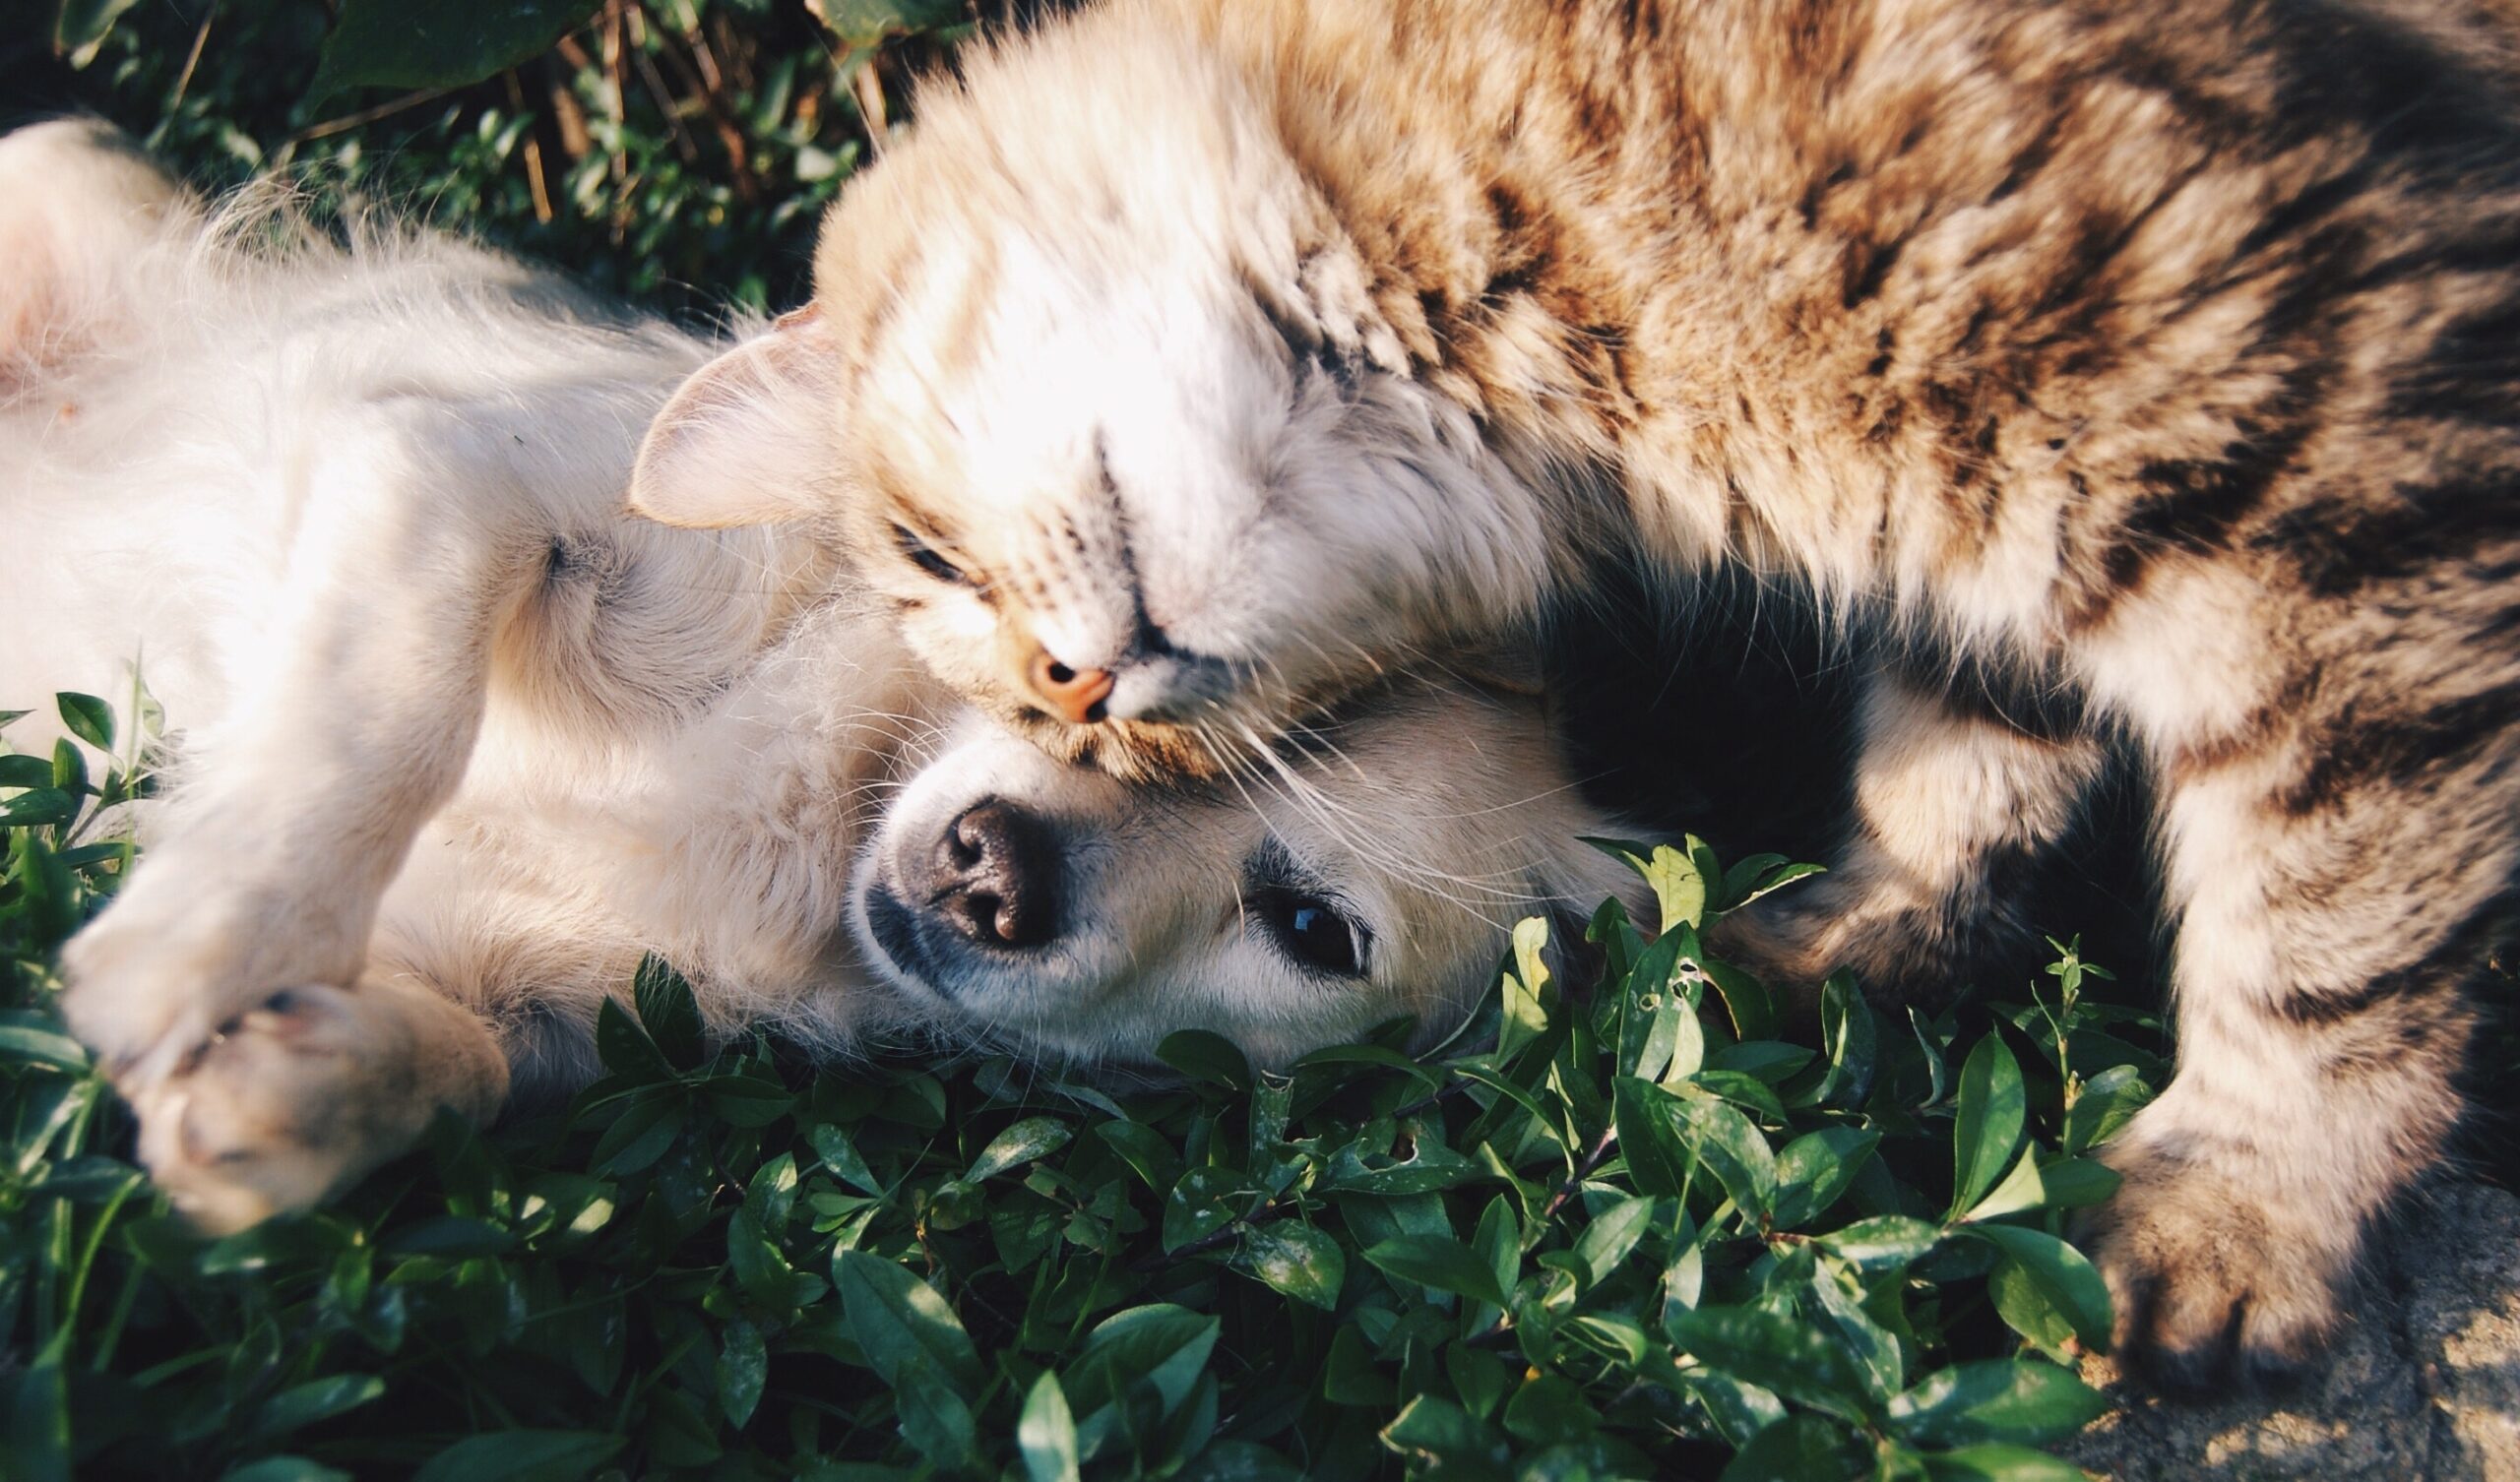 A small dog and tabby cat nuzzling.